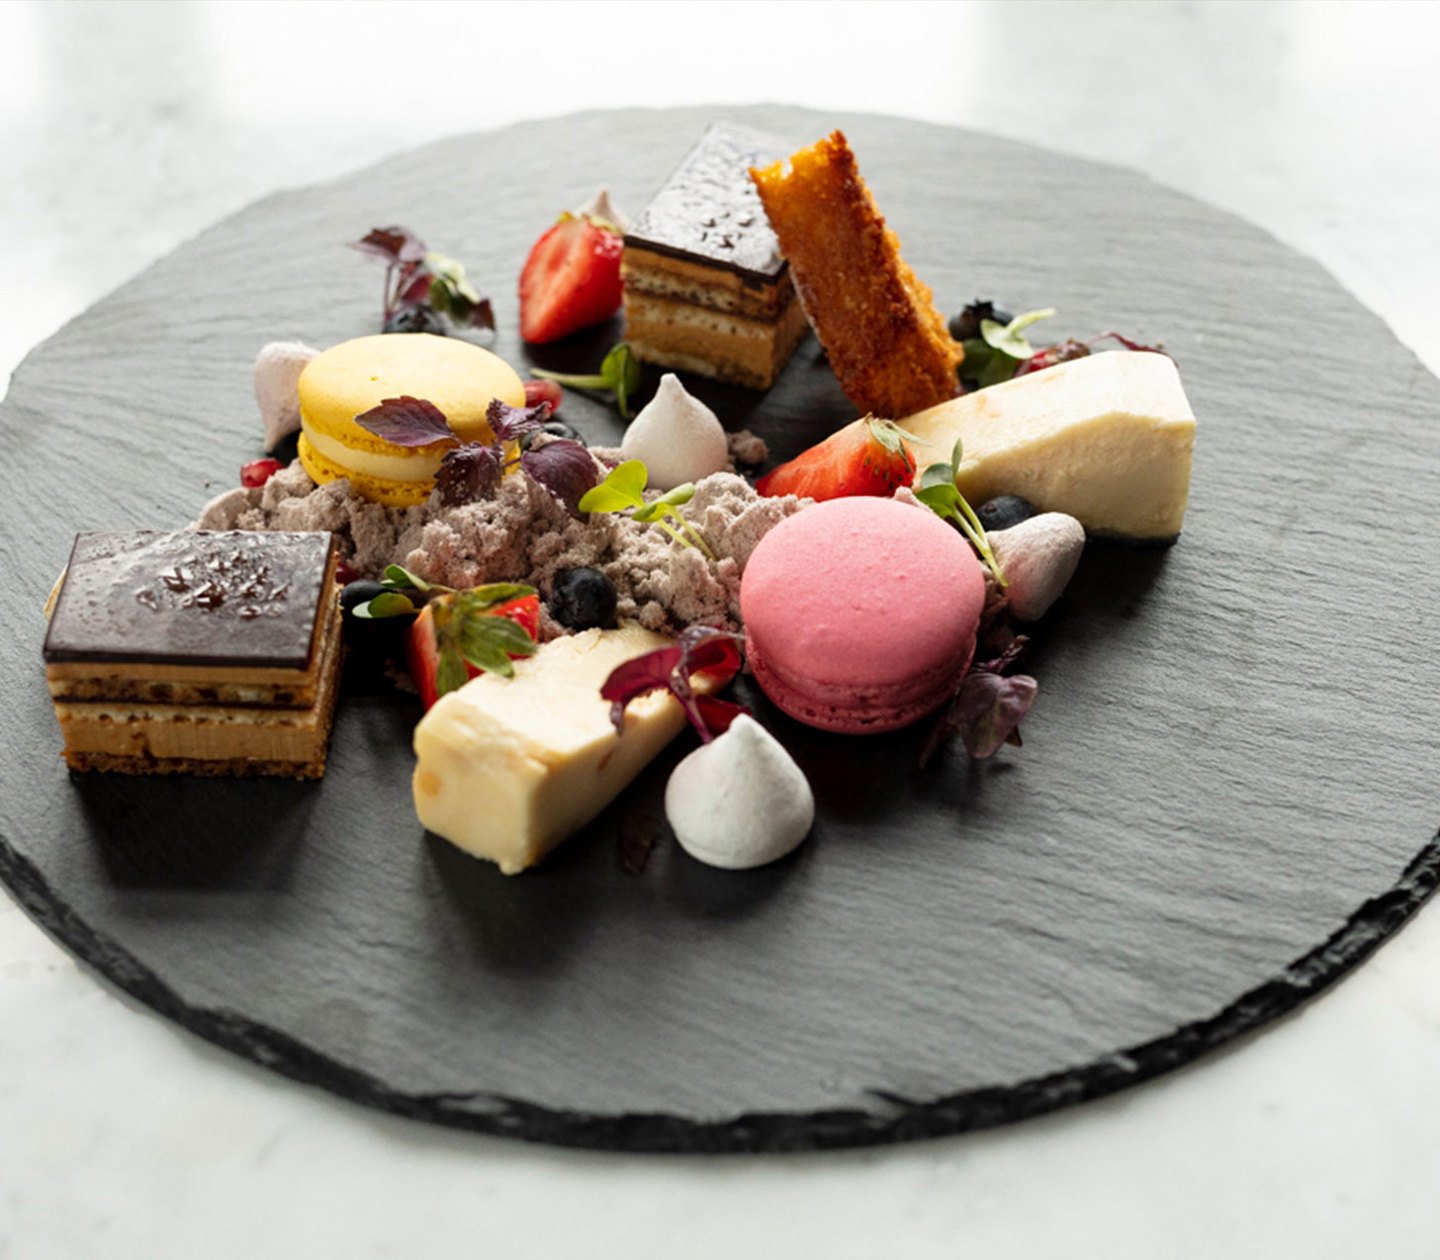 A plate of sweets